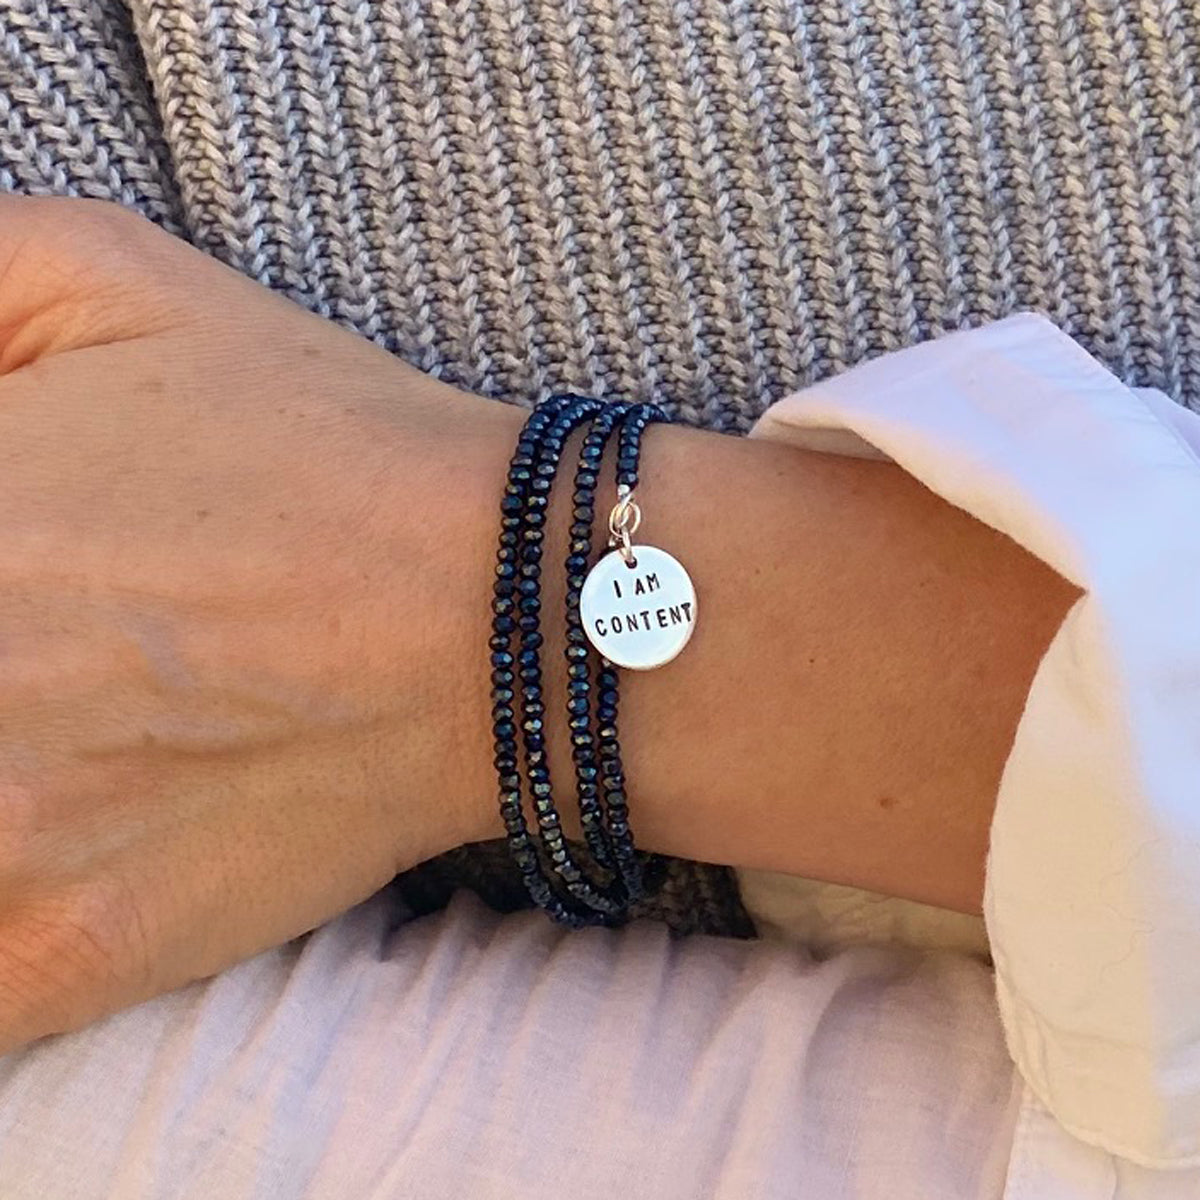 I am Content Affirmation Bracelet to Help Feel Happy with Midnight Dark Crystals